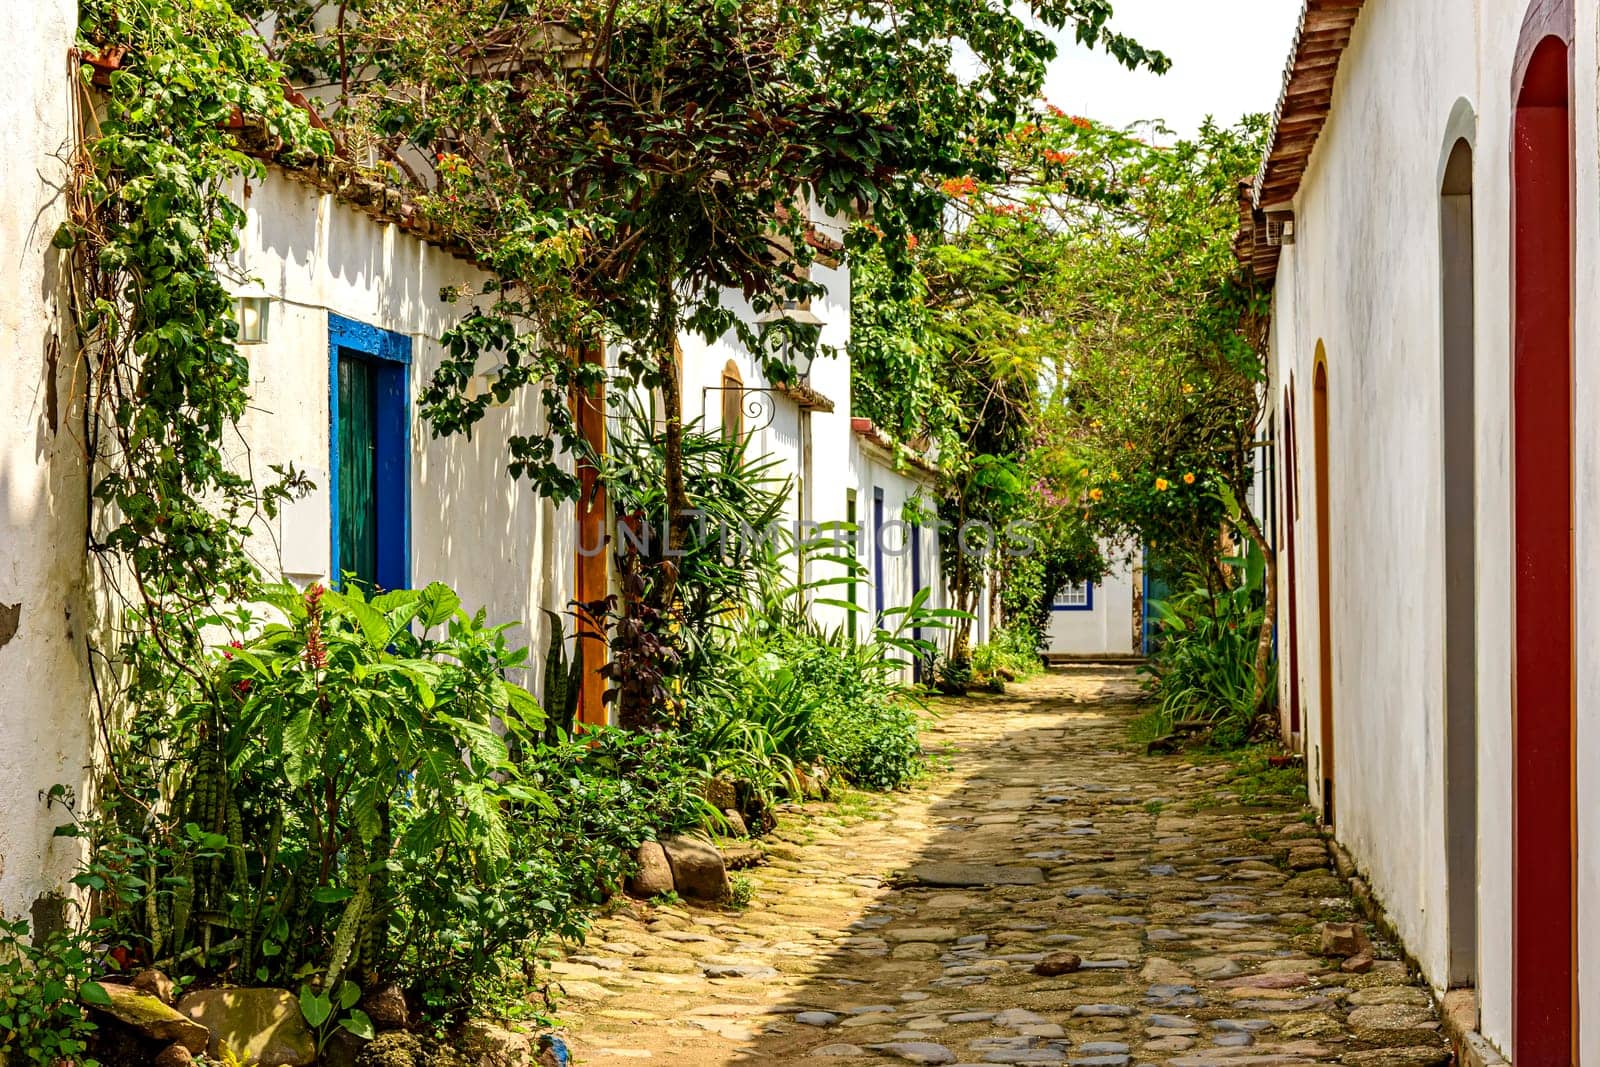 Street of the historic city of Paraty with its cobblestones and old colonial-style houses with a facade decorated with plants and flowers